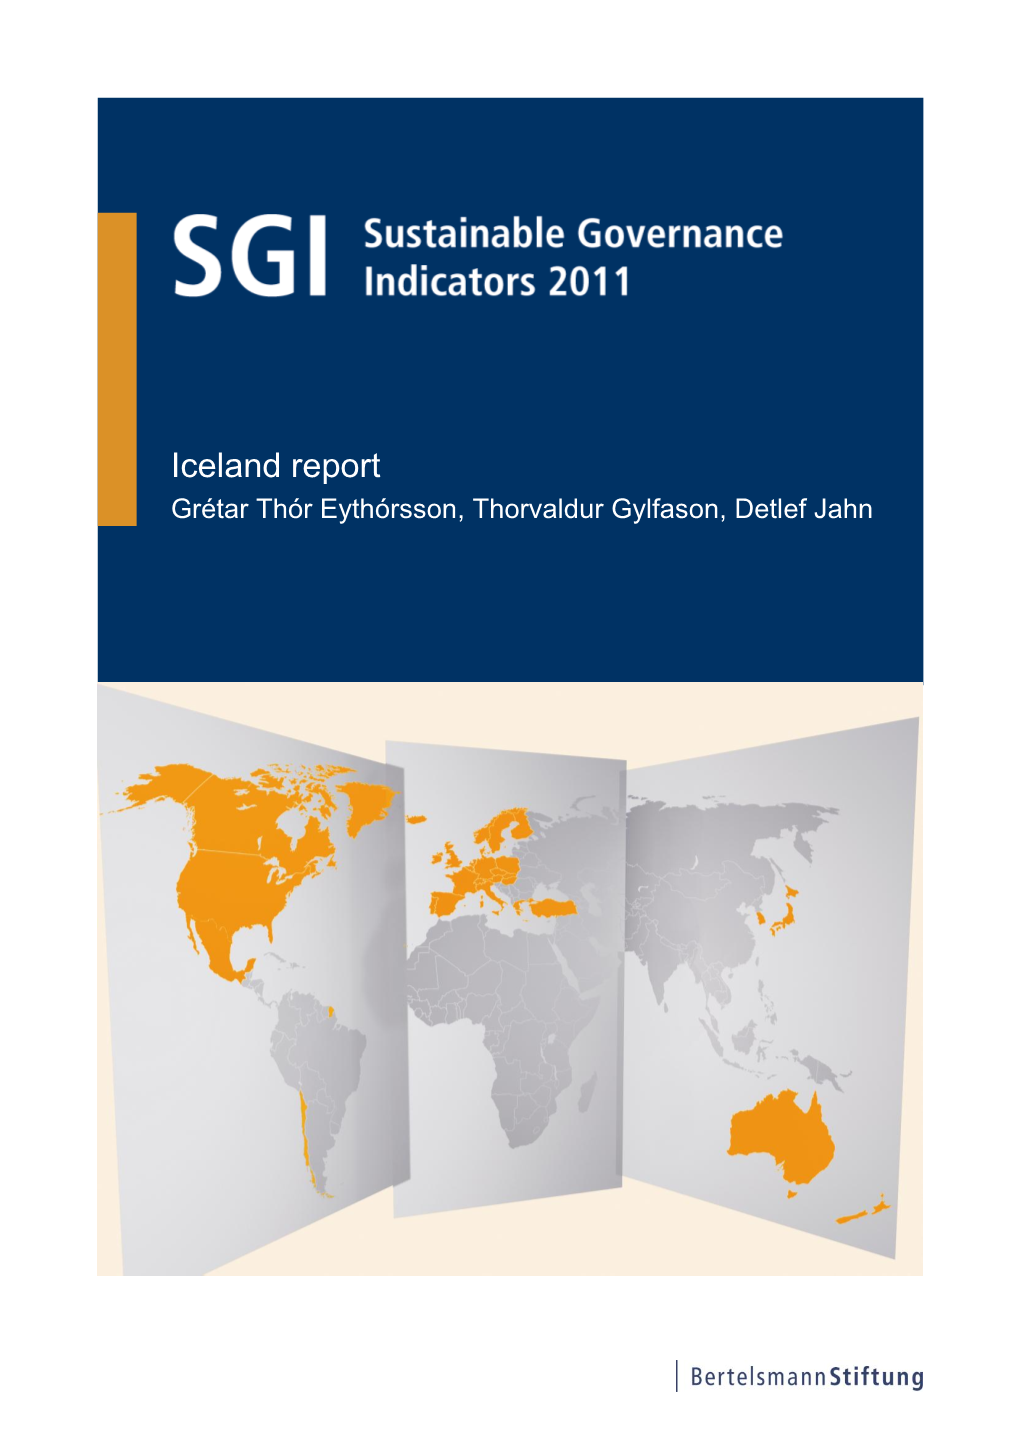 Iceland Country Report | SGI Sustainable Governance Indicators